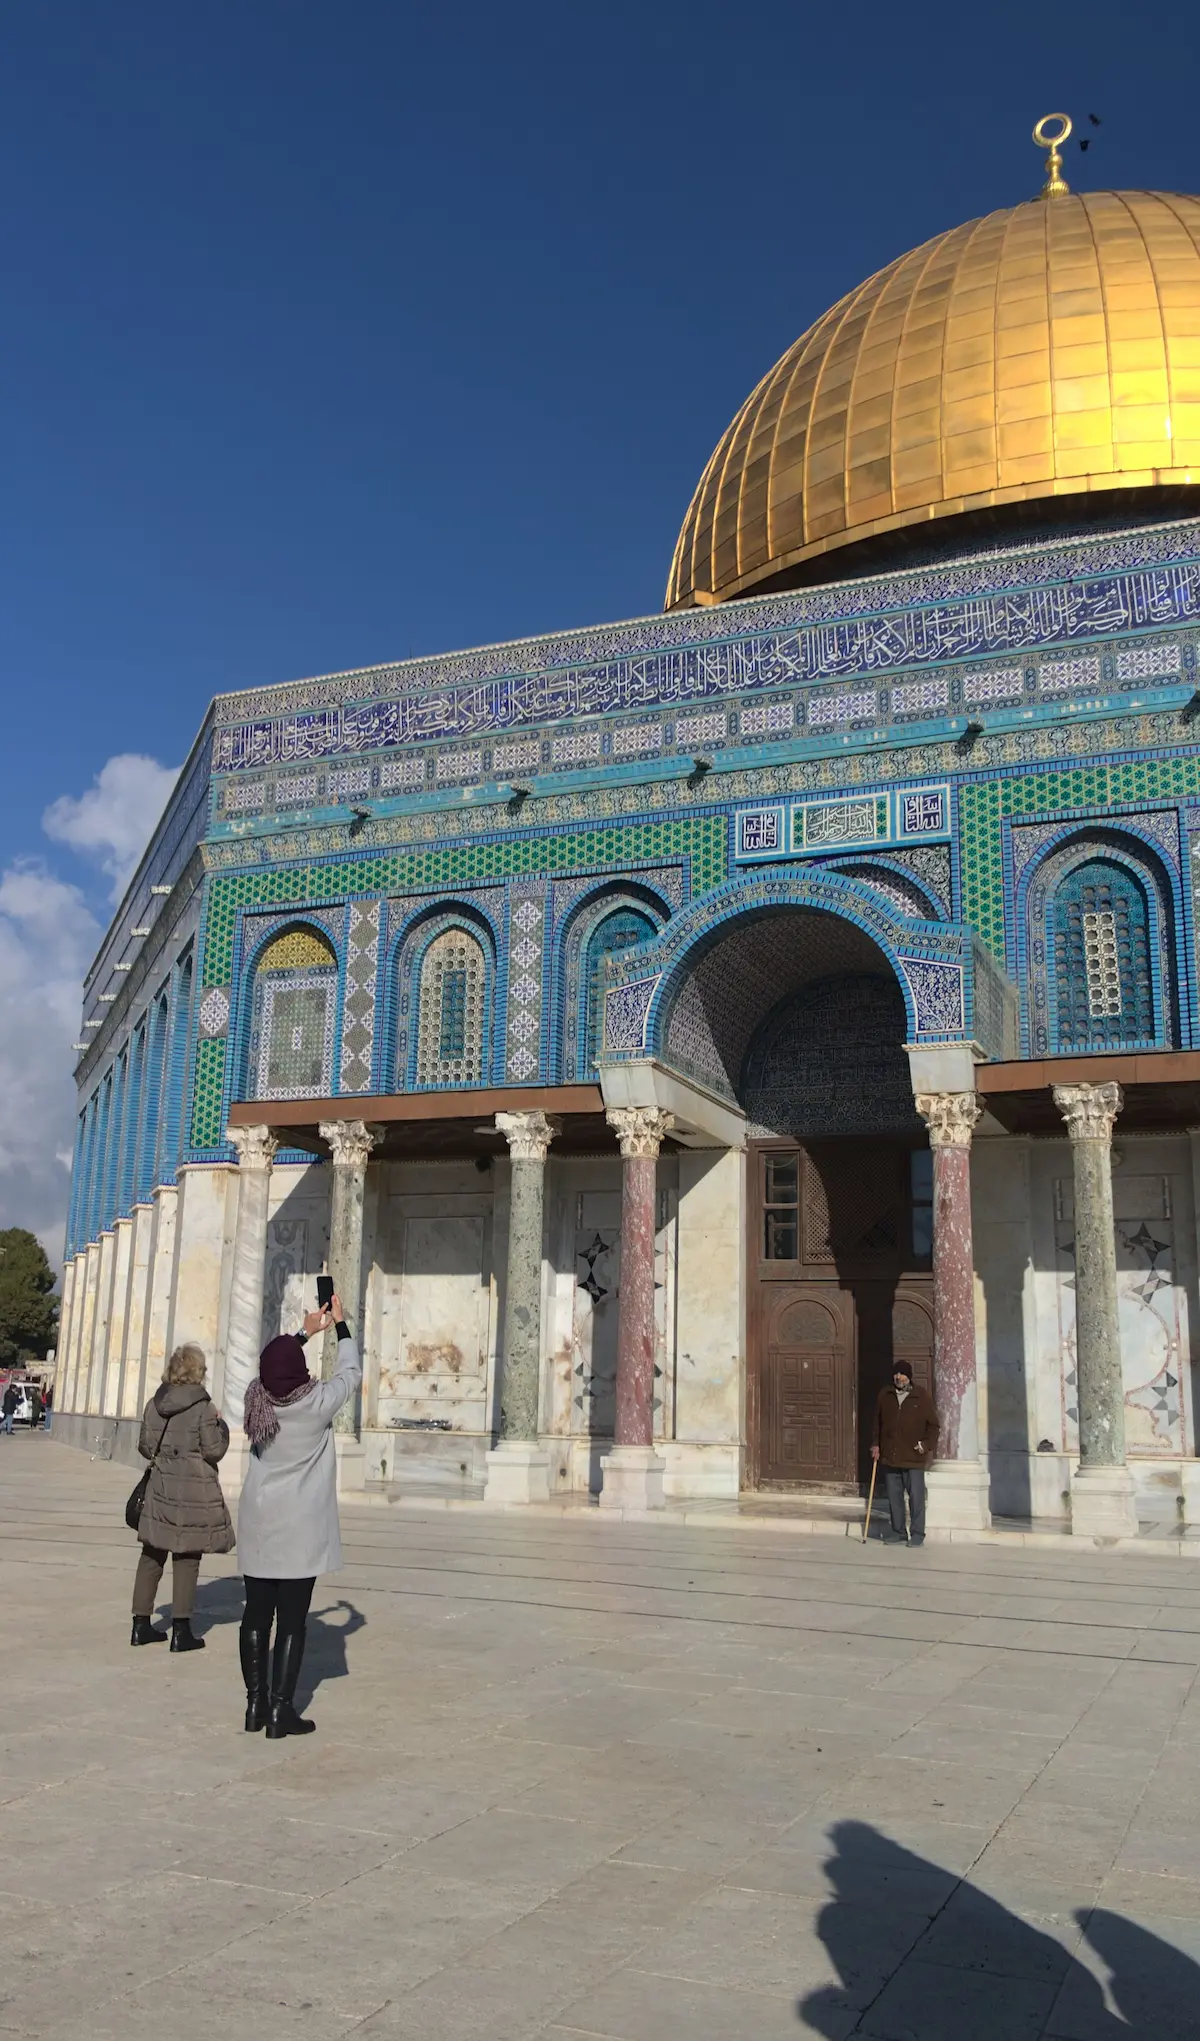 The Dome of the rock up close. Below the golden dome are the details of the wall well visible. Wich are intricate patterns in blue and green tones. In the foreground a woman is stretching to make a photo with her smartphone with an old man posing for the photo with a walking cane.